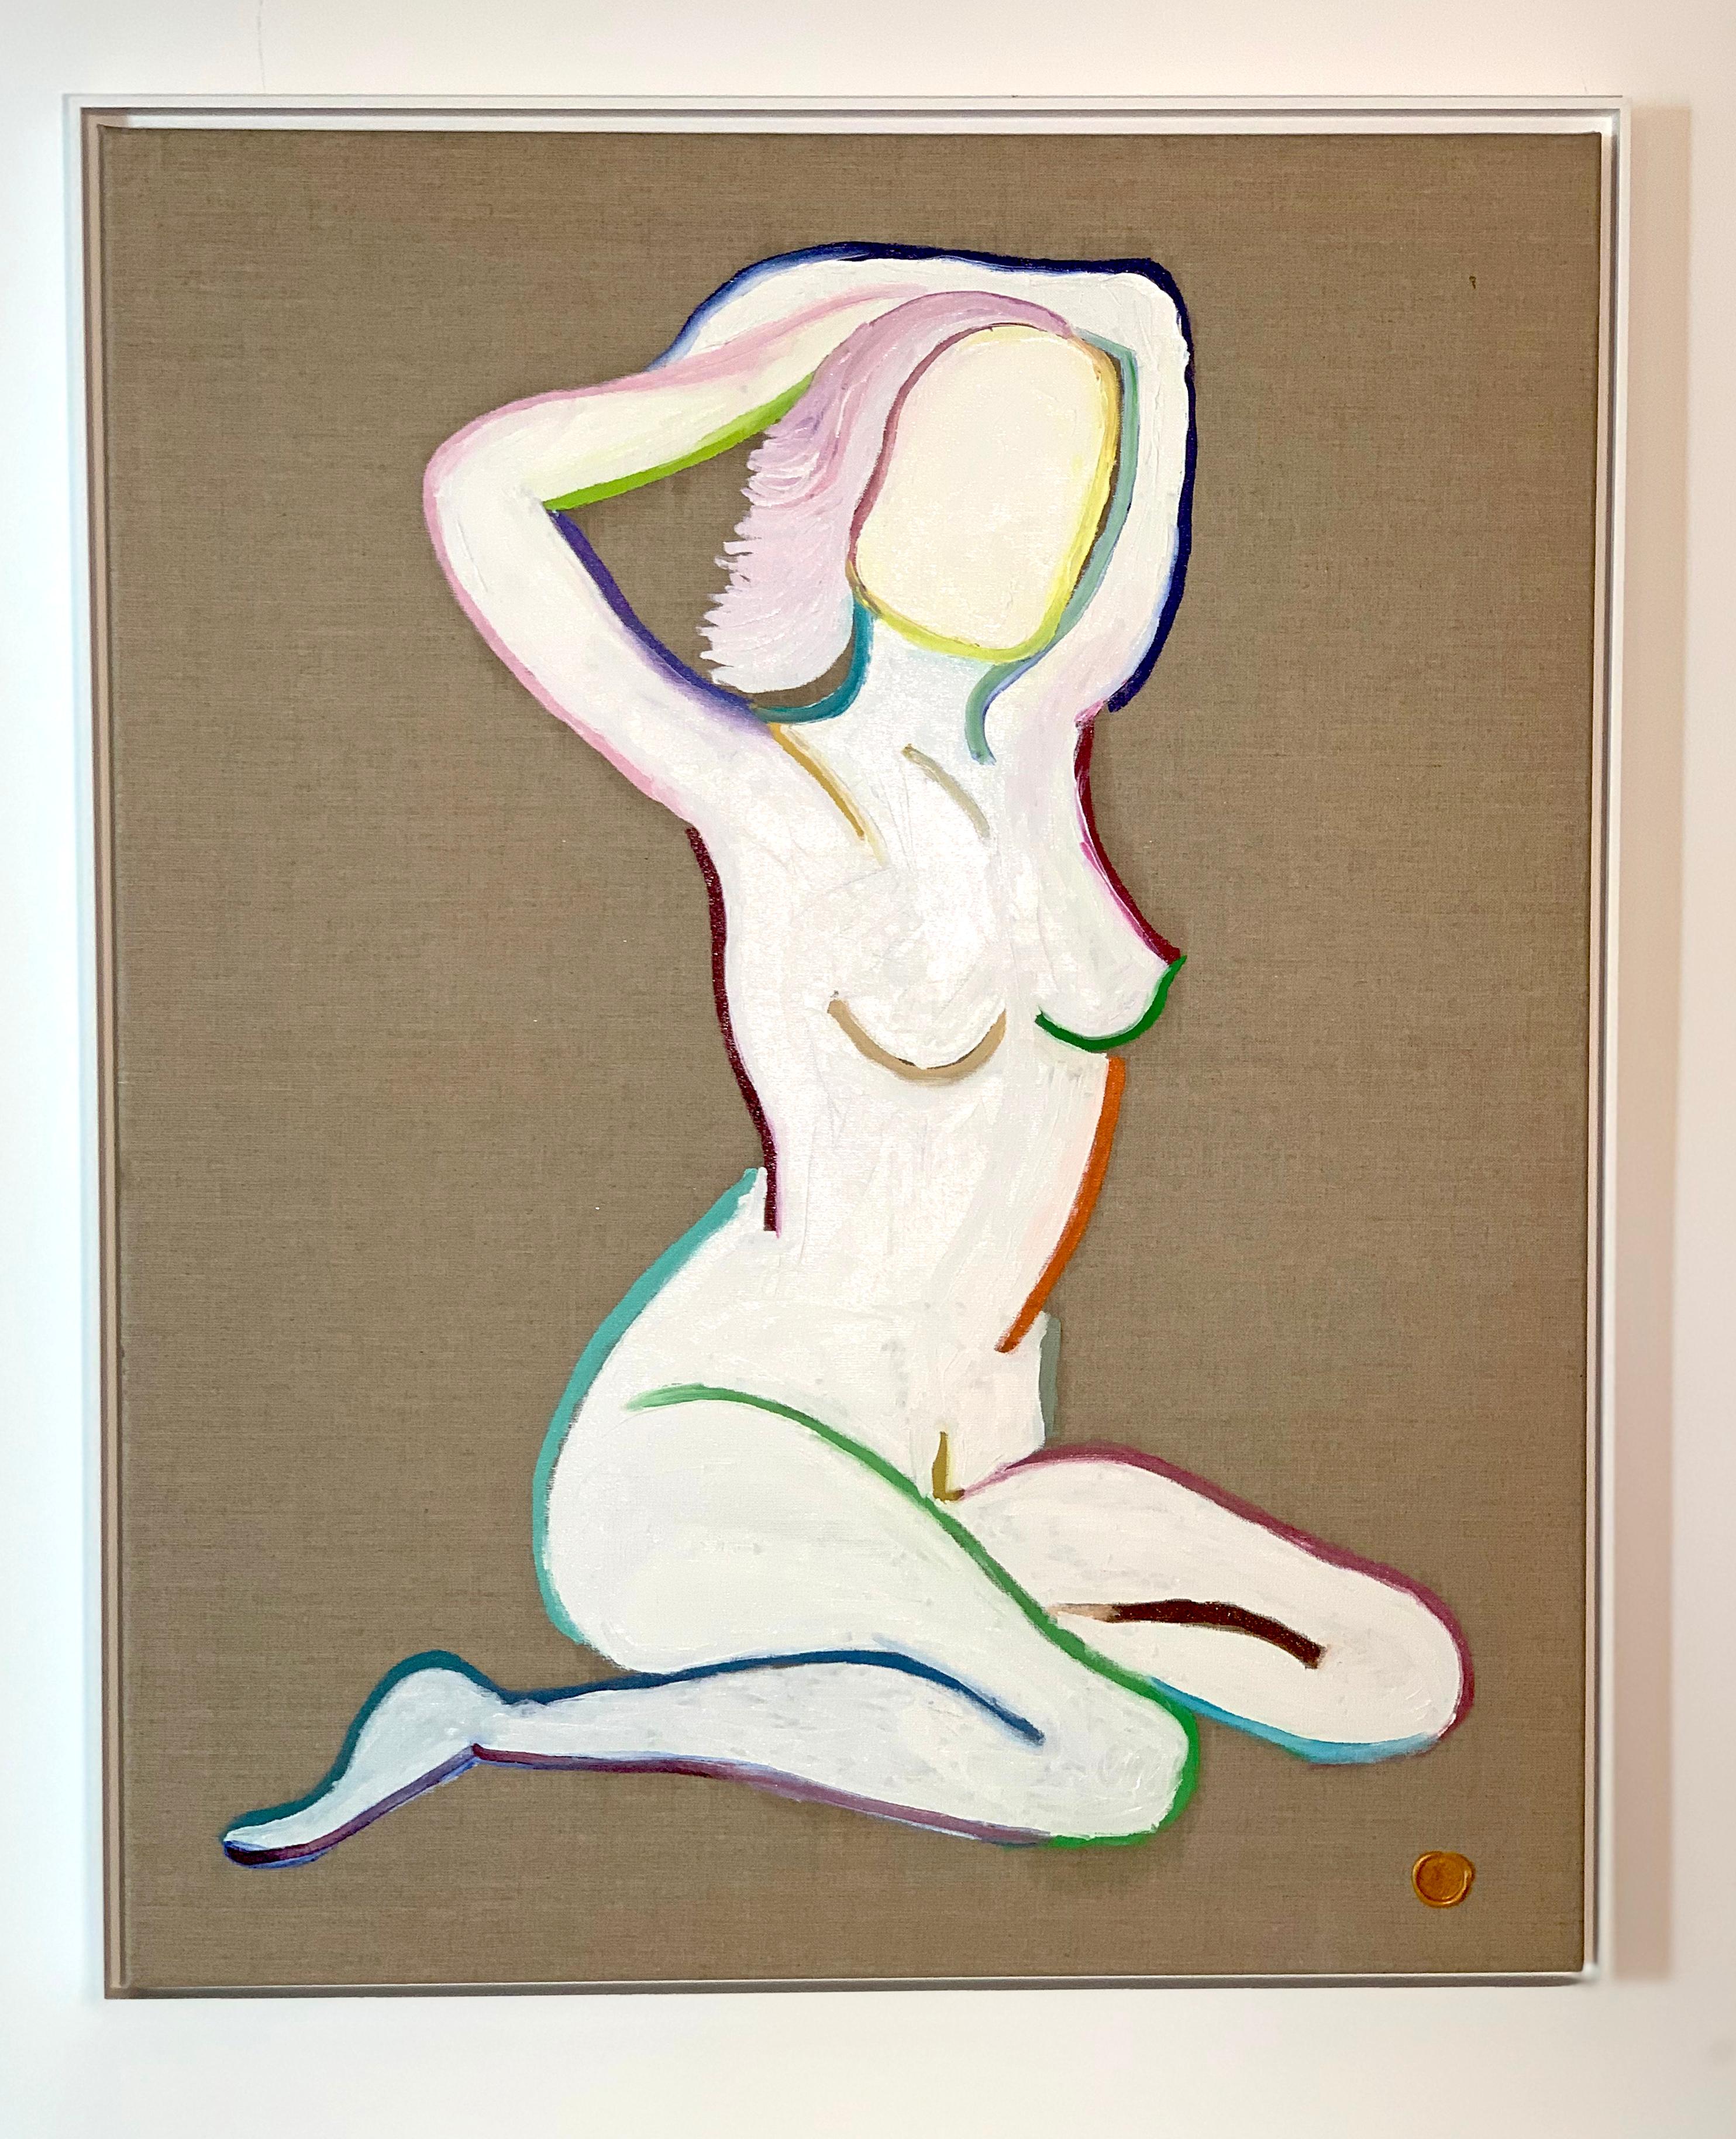 Posing for Matisse by K. Hormel - Nude Contemporary abstract Oil painting - Painting by Katharina Hormel